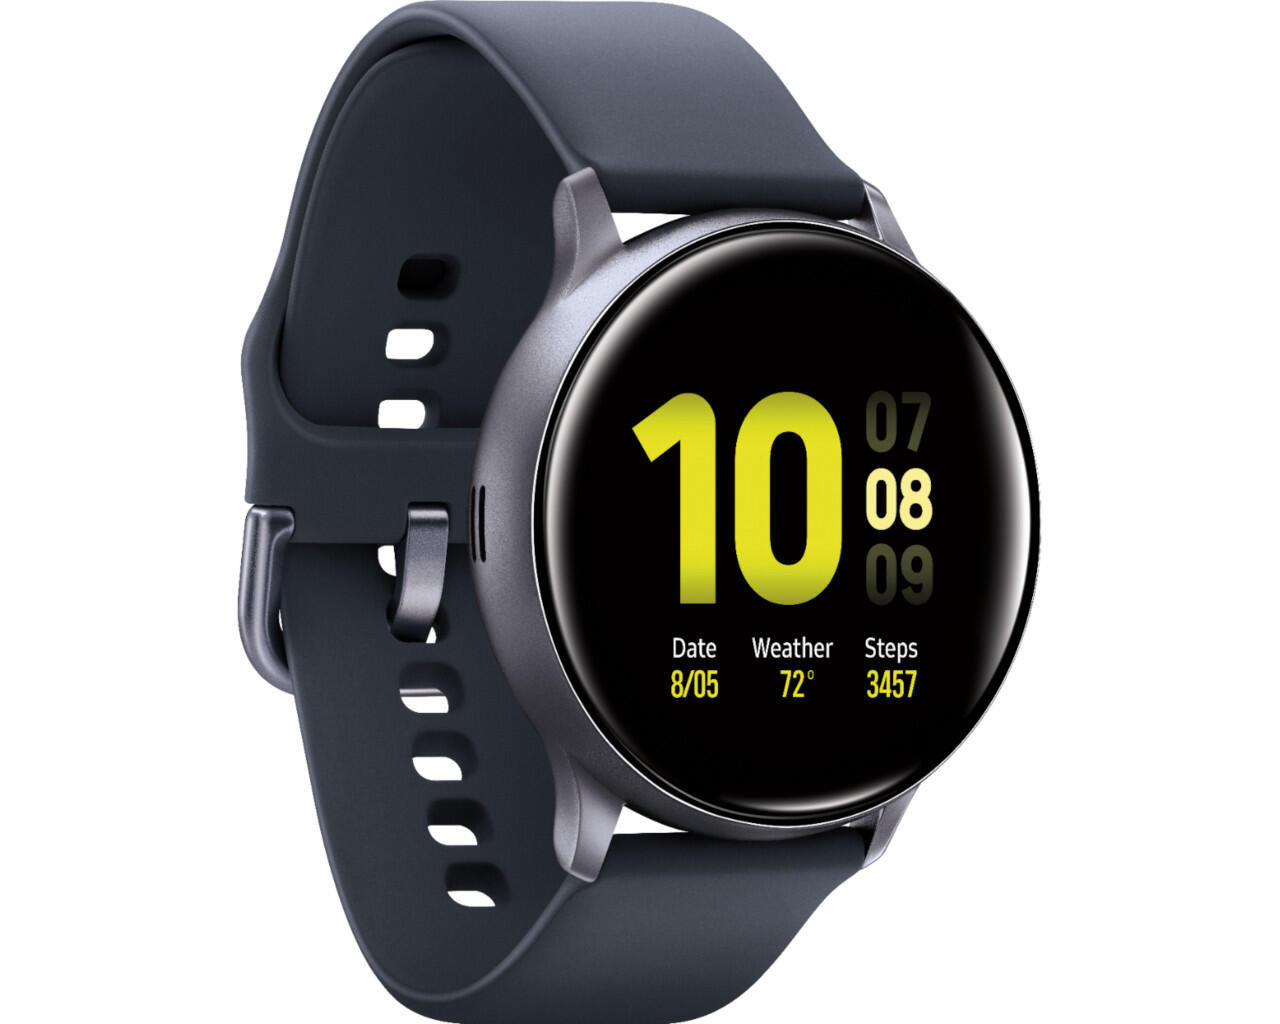 Black Friday 2020: 10 smartwatch and fitness tracker deals